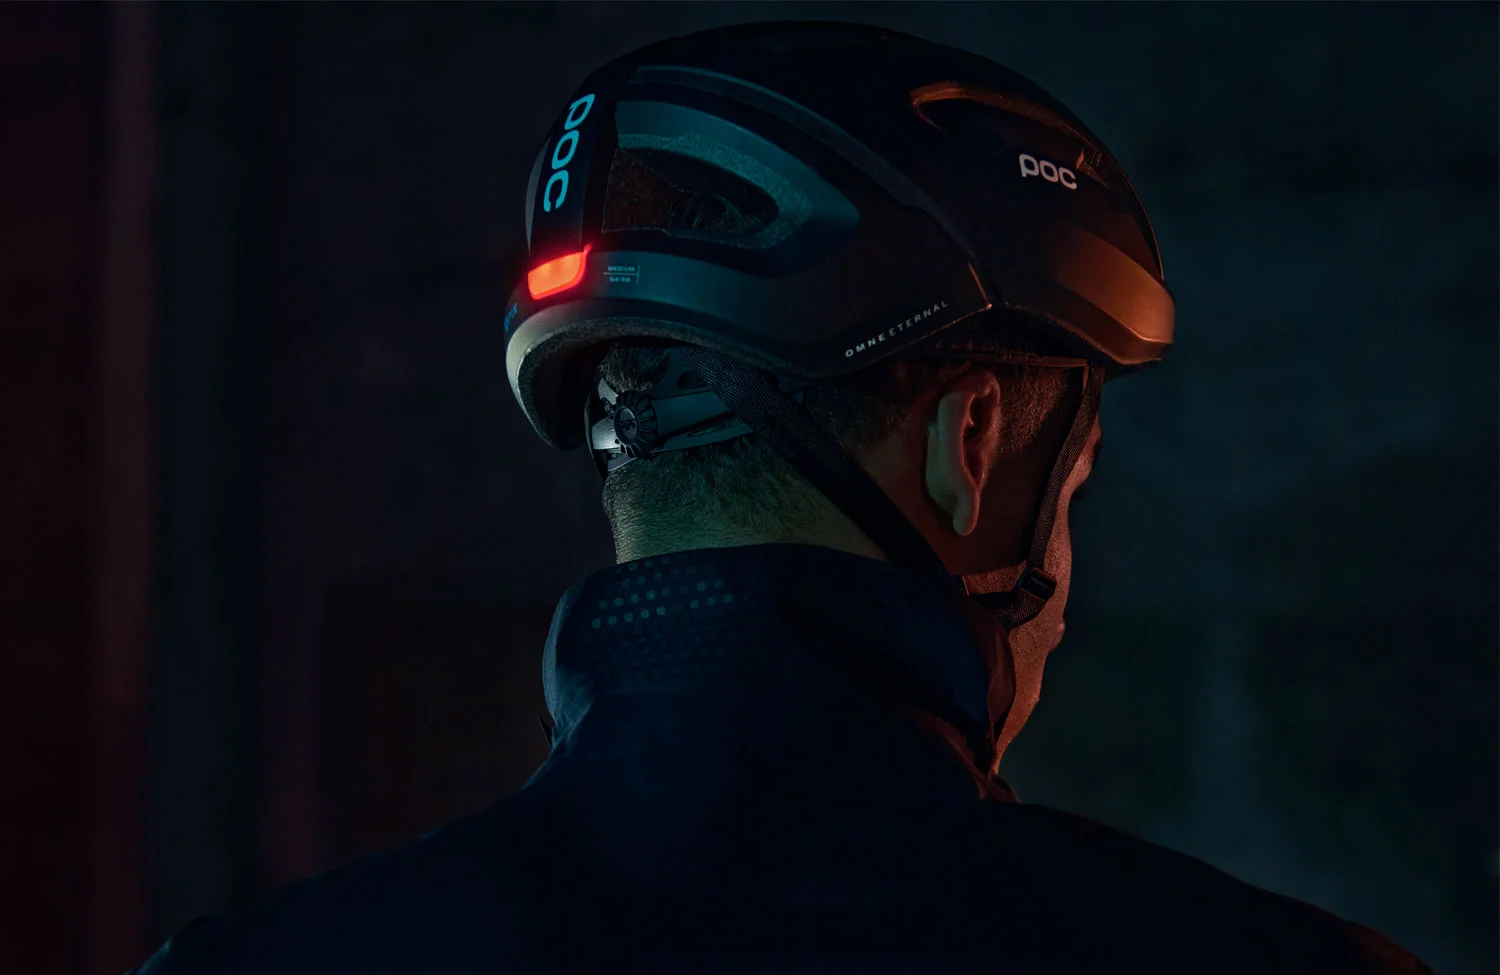 World's first cycling helmet with rear light and endless energy